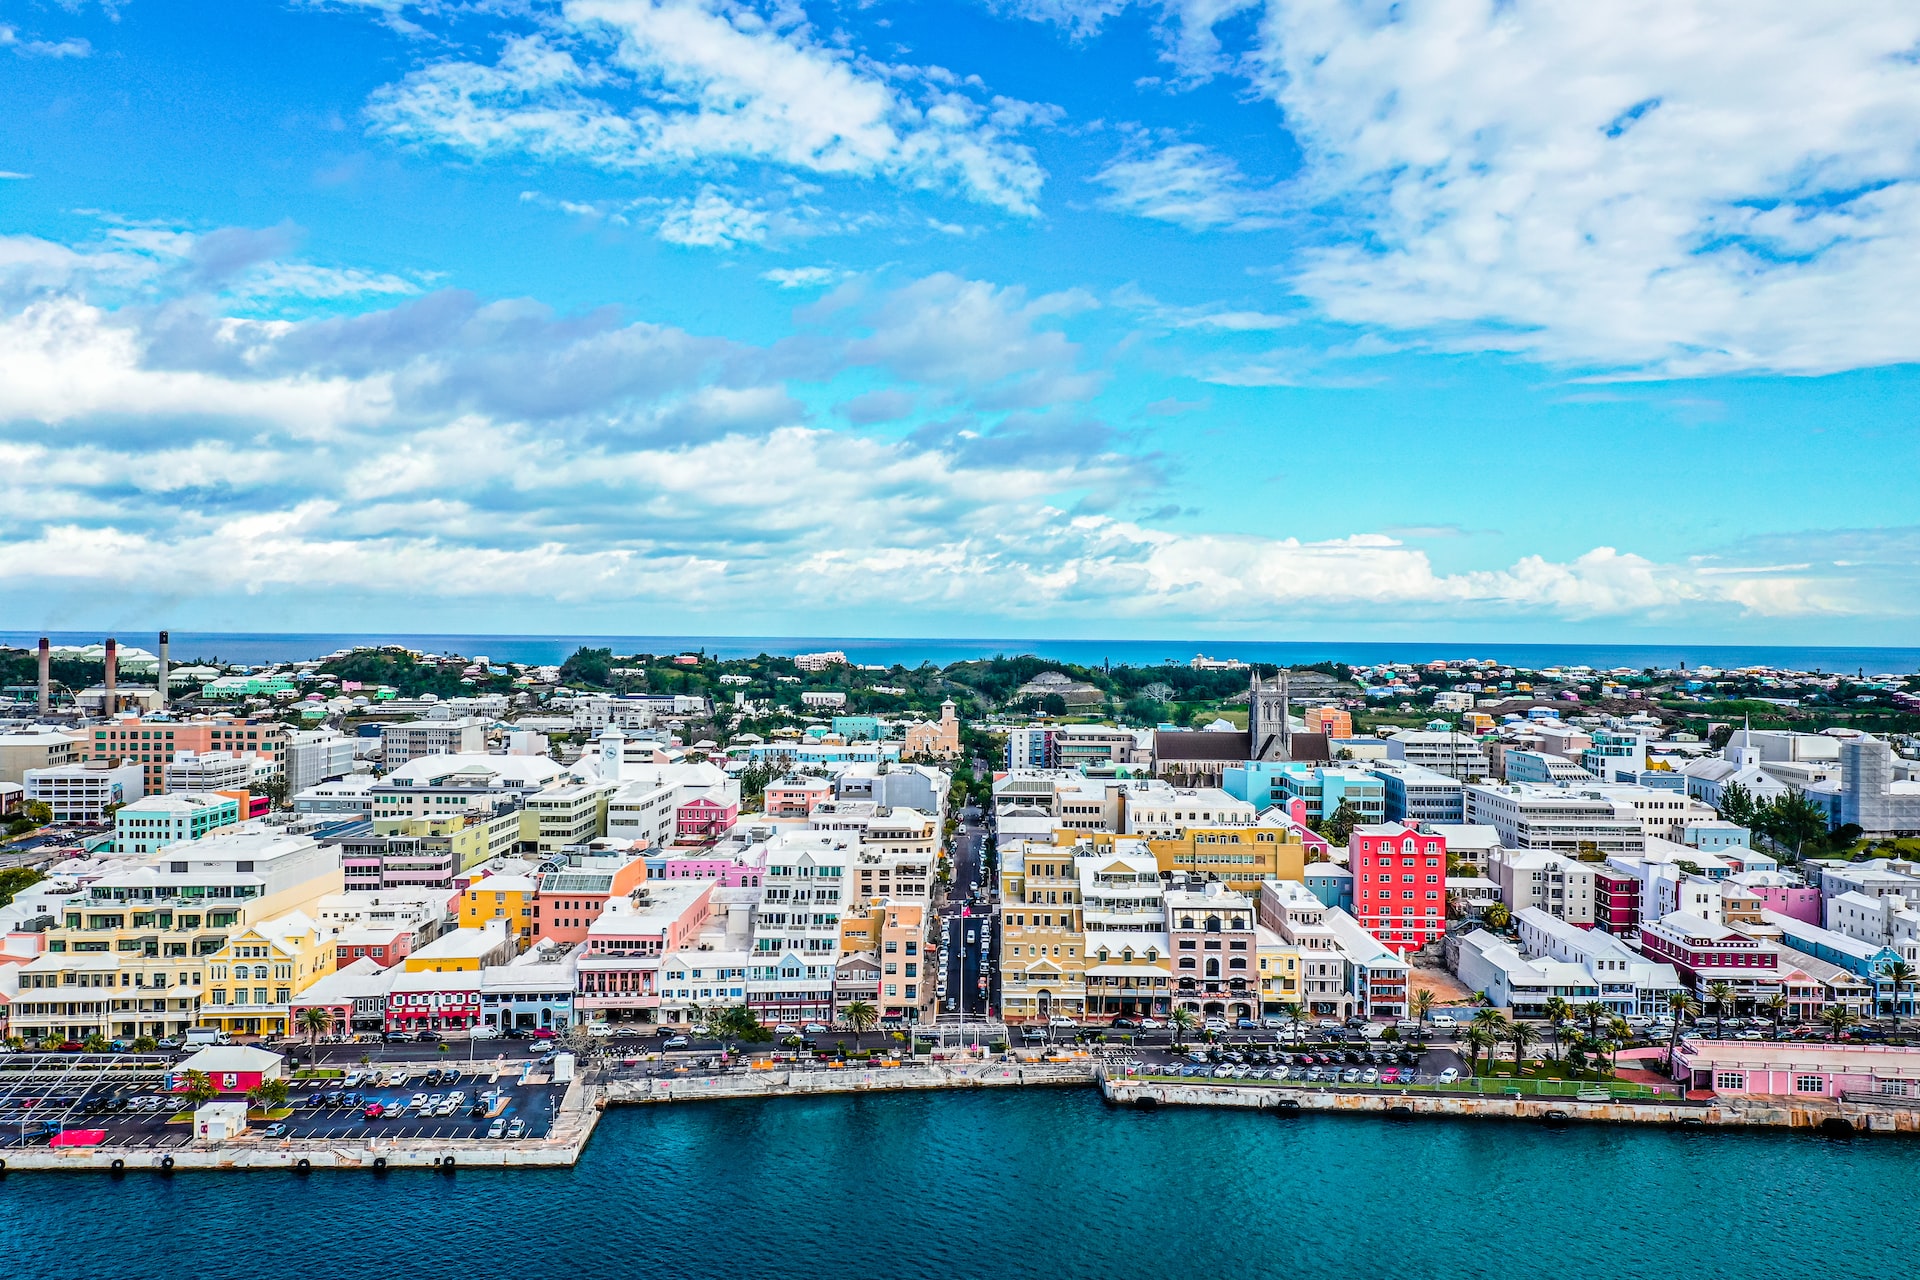 Aerial view of Front Street in Hamilton, Bermuda, with buildings in different colors and the dark blue ocean